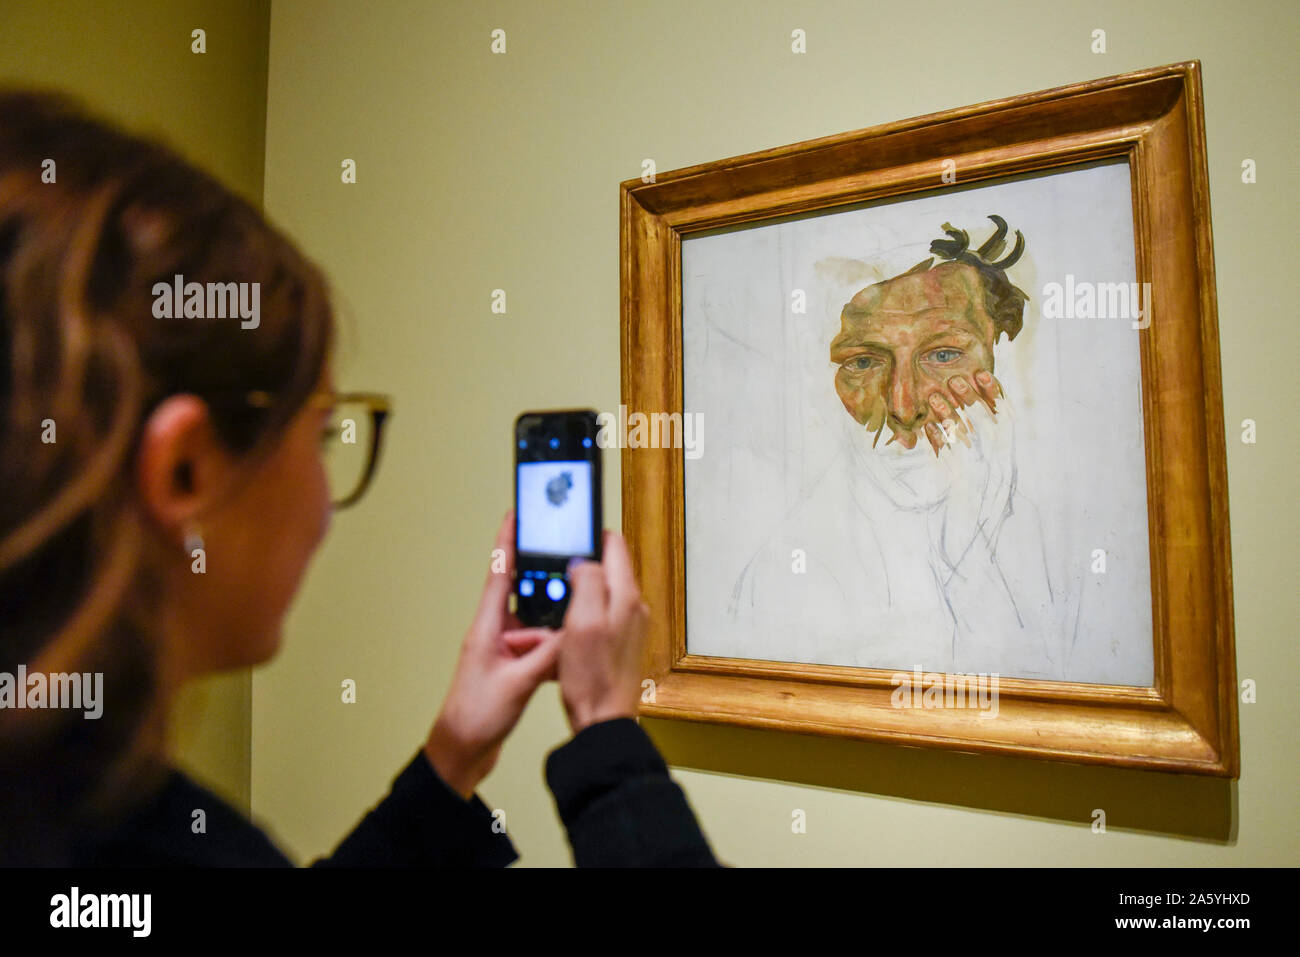 https://c8.alamy.com/comp/2A5YHXD/london-uk-23-october-2019-a-visitor-views-self-portrait-1956-by-lucian-freud-preview-of-lucian-freud-the-self-portraits-at-the-royal-academy-of-arts-in-piccadilly-56-works-on-display-chart-freuds-artistic-development-over-almost-seven-decades-on-canvas-and-paper-in-a-show-which-runs-27-october-to-26-january-2020-credit-stephen-chung-alamy-live-news-2A5YHXD.jpg